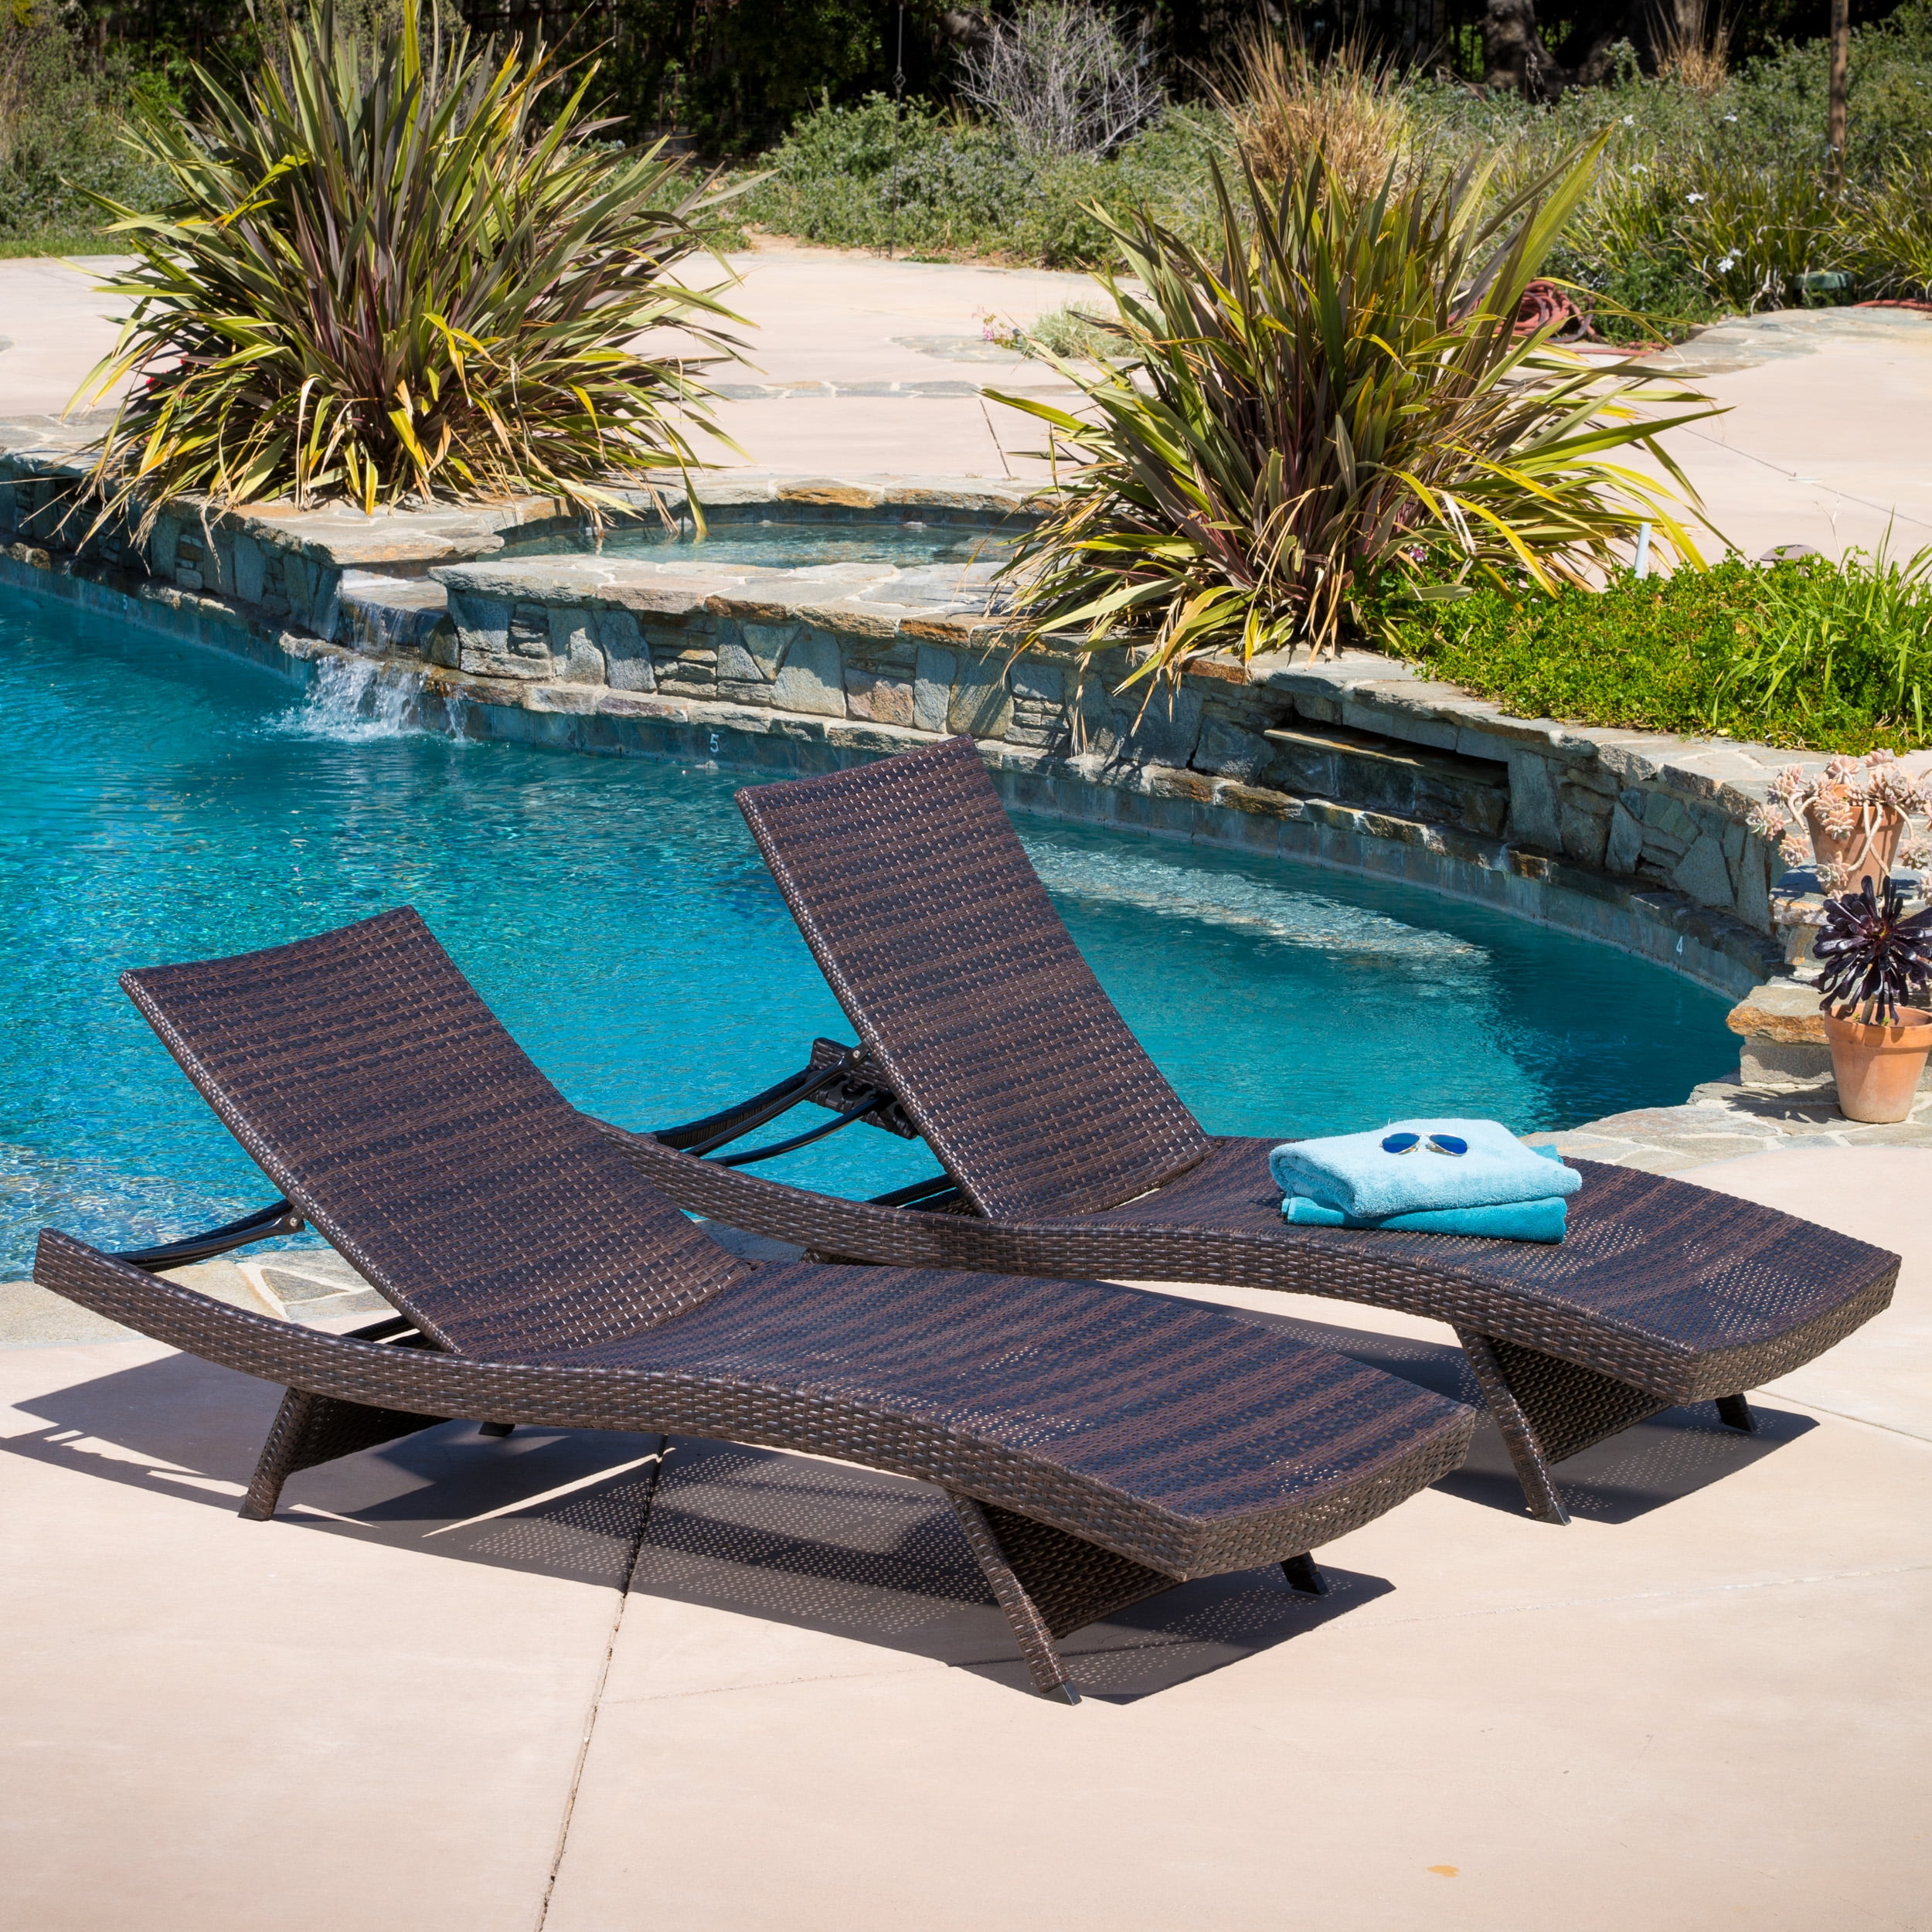 Hamlin Outdoor Brown Wicker Chaise Lounge Chairs (Set of 2